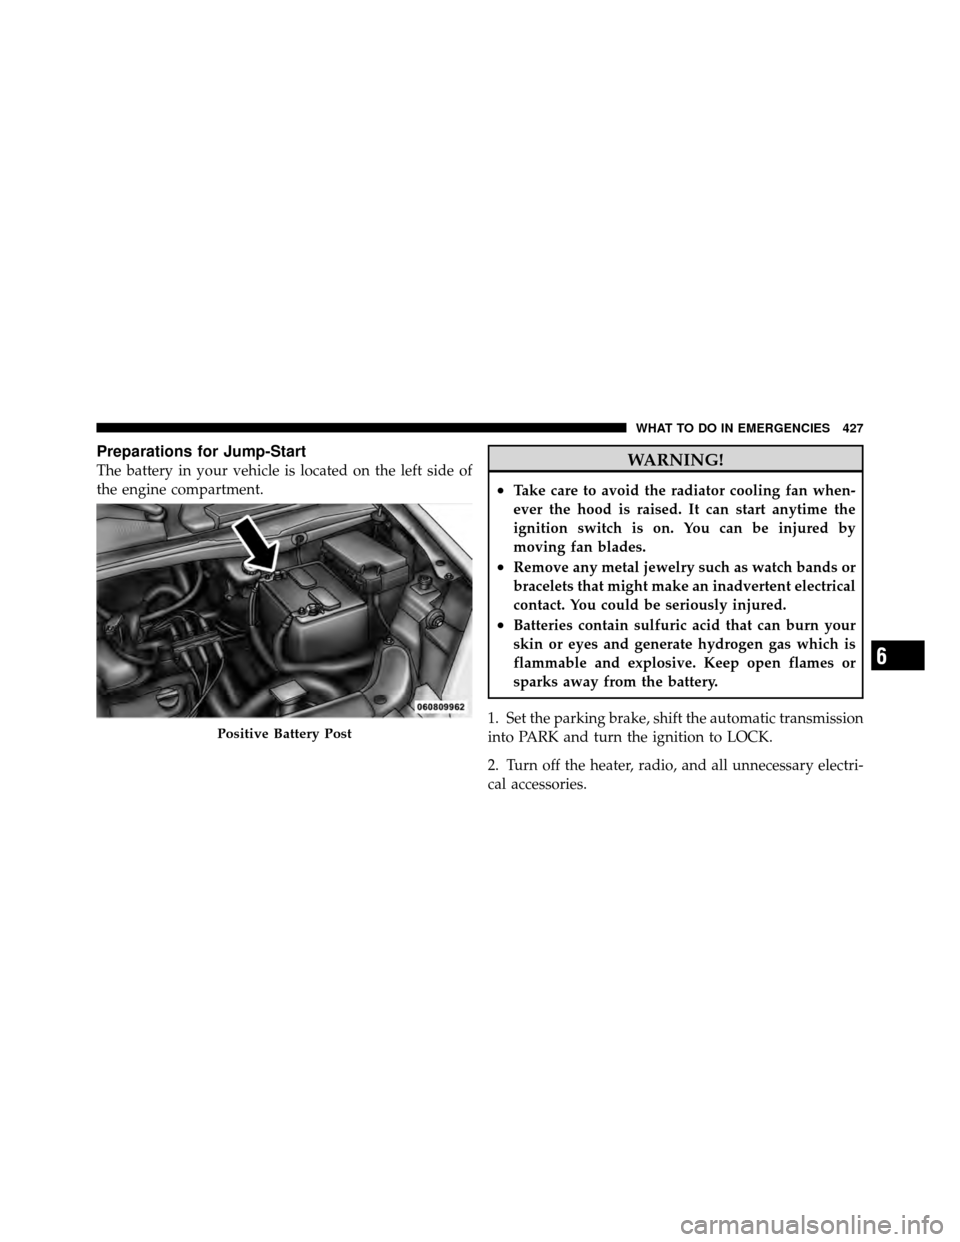 CHRYSLER TOWN AND COUNTRY 2010 5.G Owners Manual Preparations for Jump-Start
The battery in your vehicle is located on the left side of
the engine compartment.WARNING!
•Take care to avoid the radiator cooling fan when-
ever the hood is raised. It 